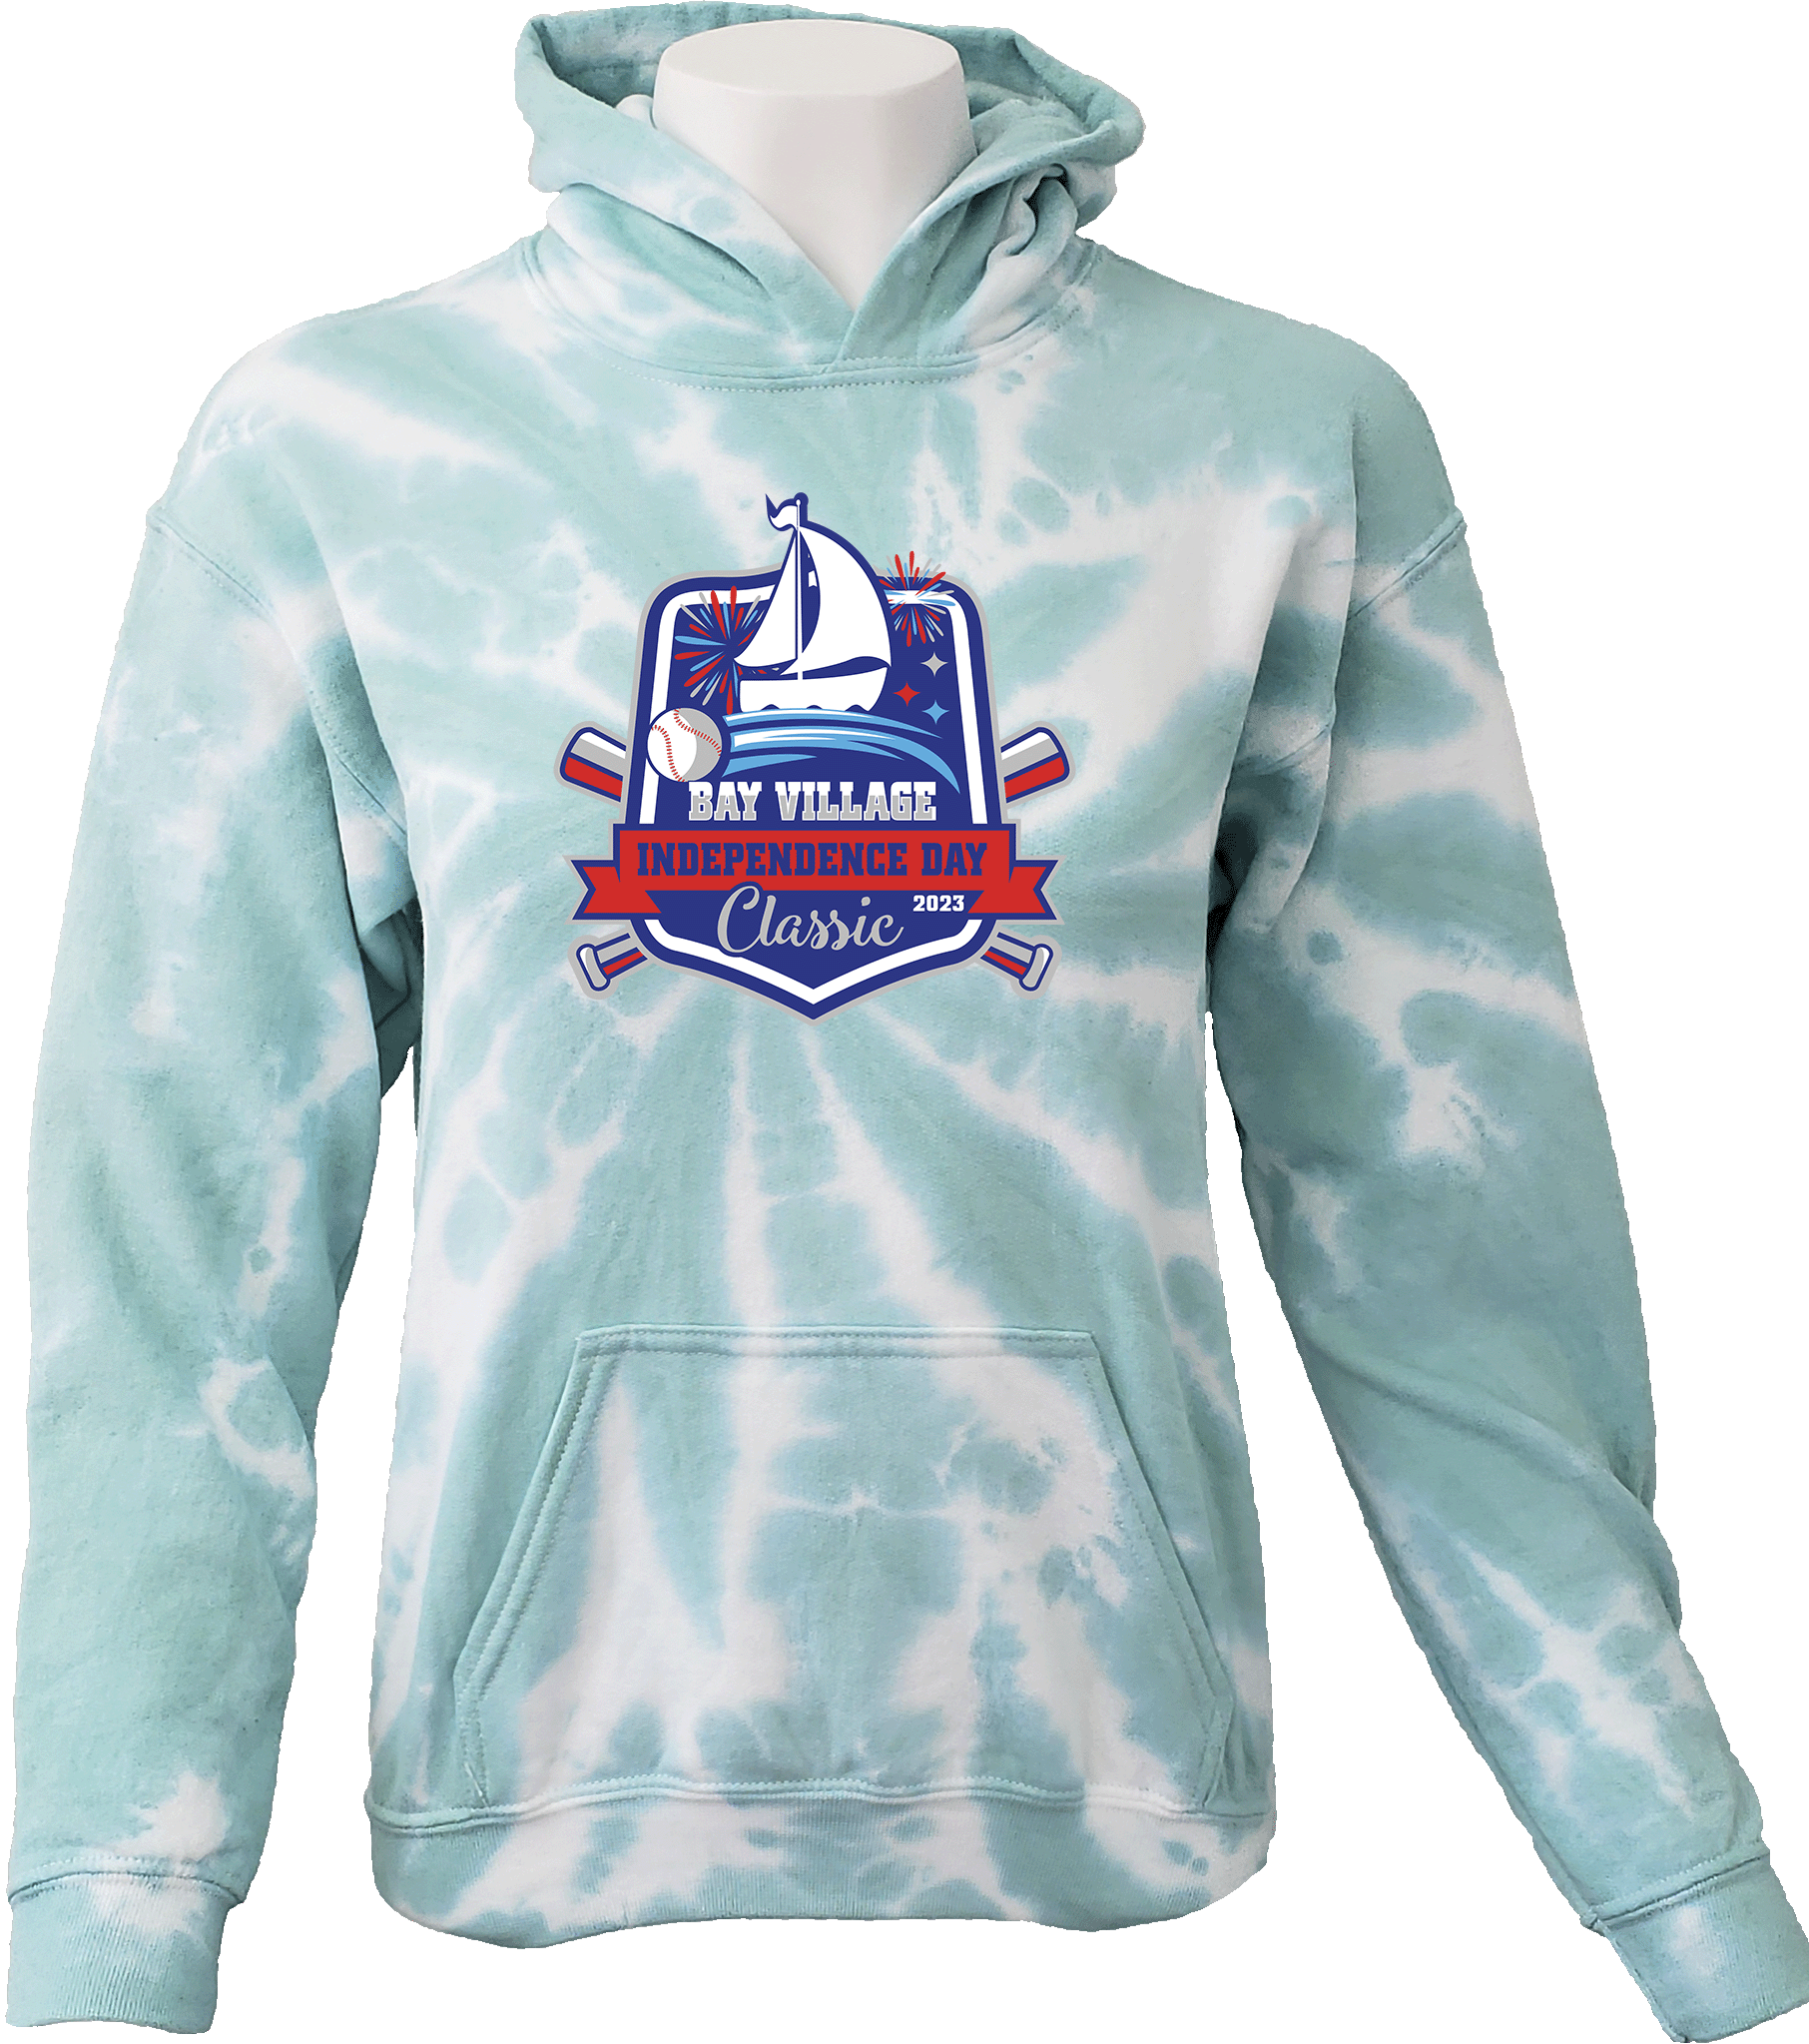 TIE-DYE HOODIES - 2023 Bay Village Independence Day Classic